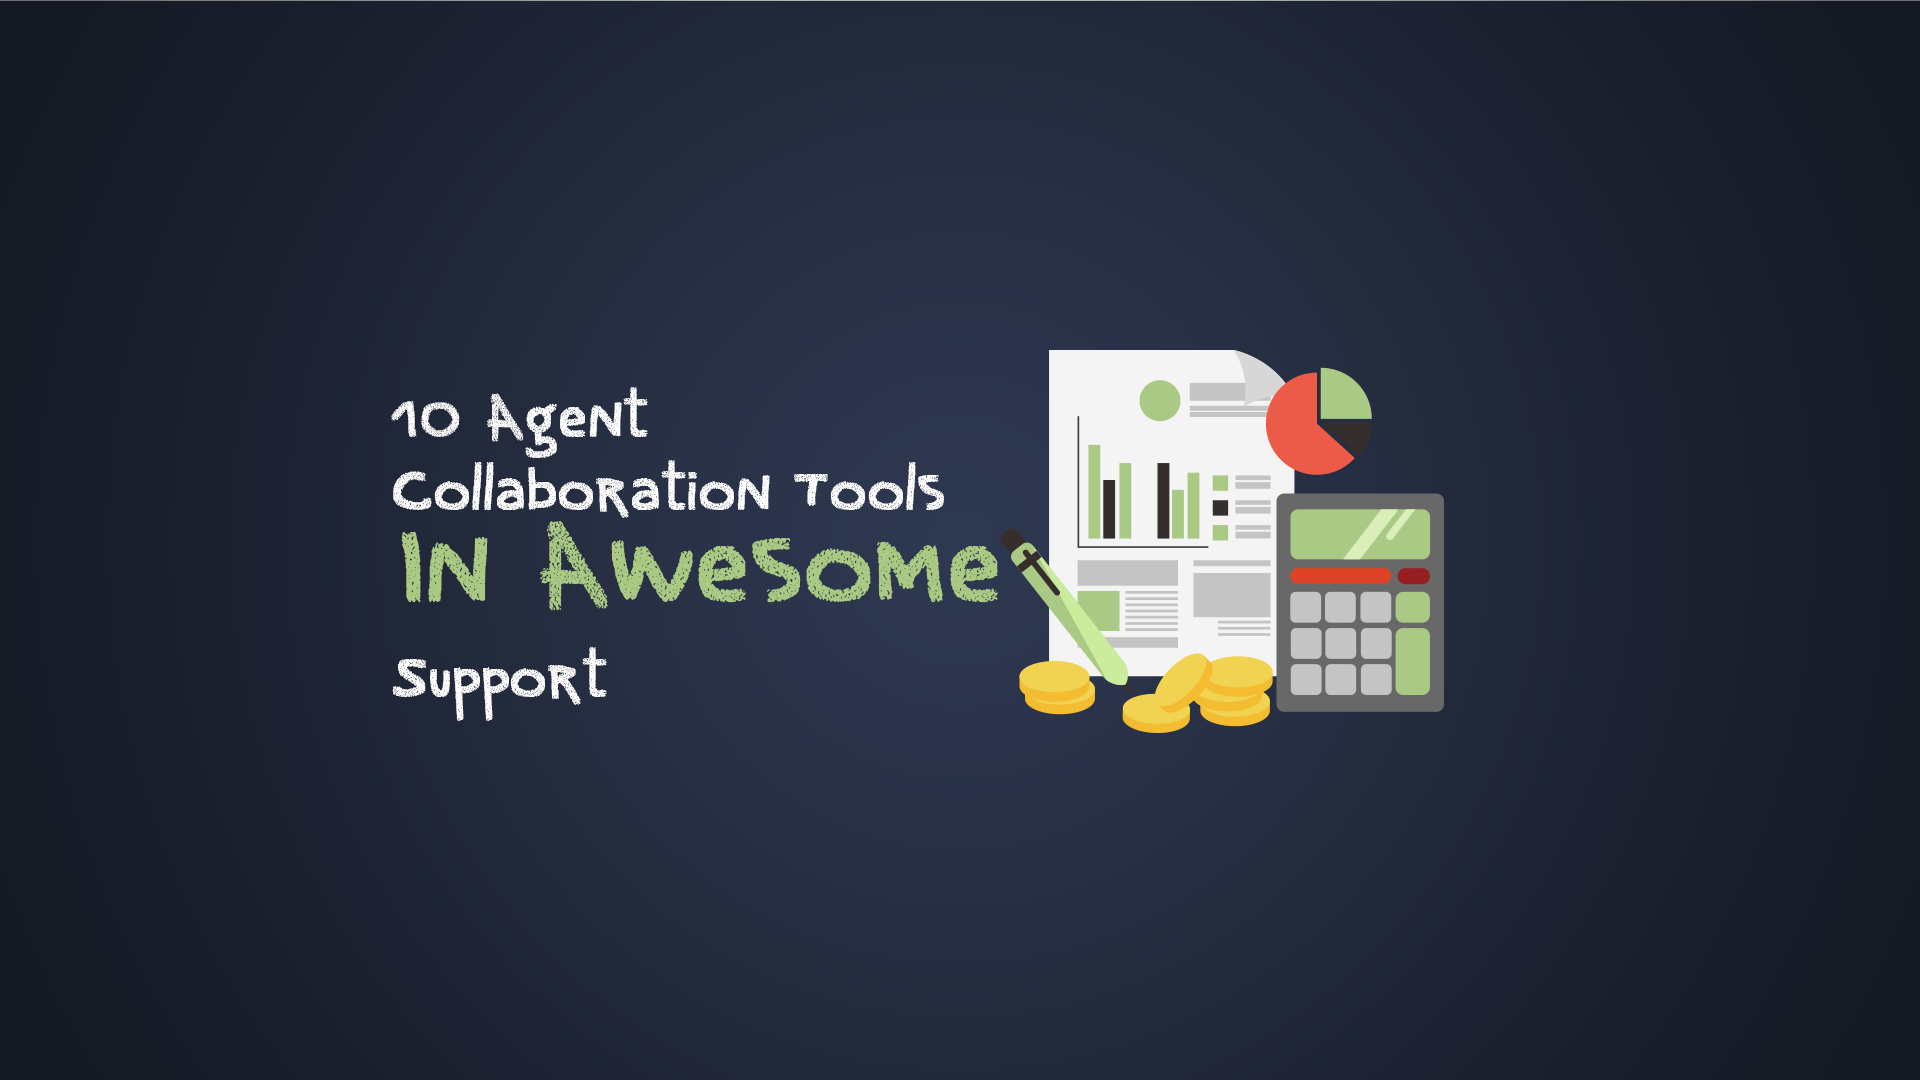 10 Agent Collaboration Tools In Awesome Support